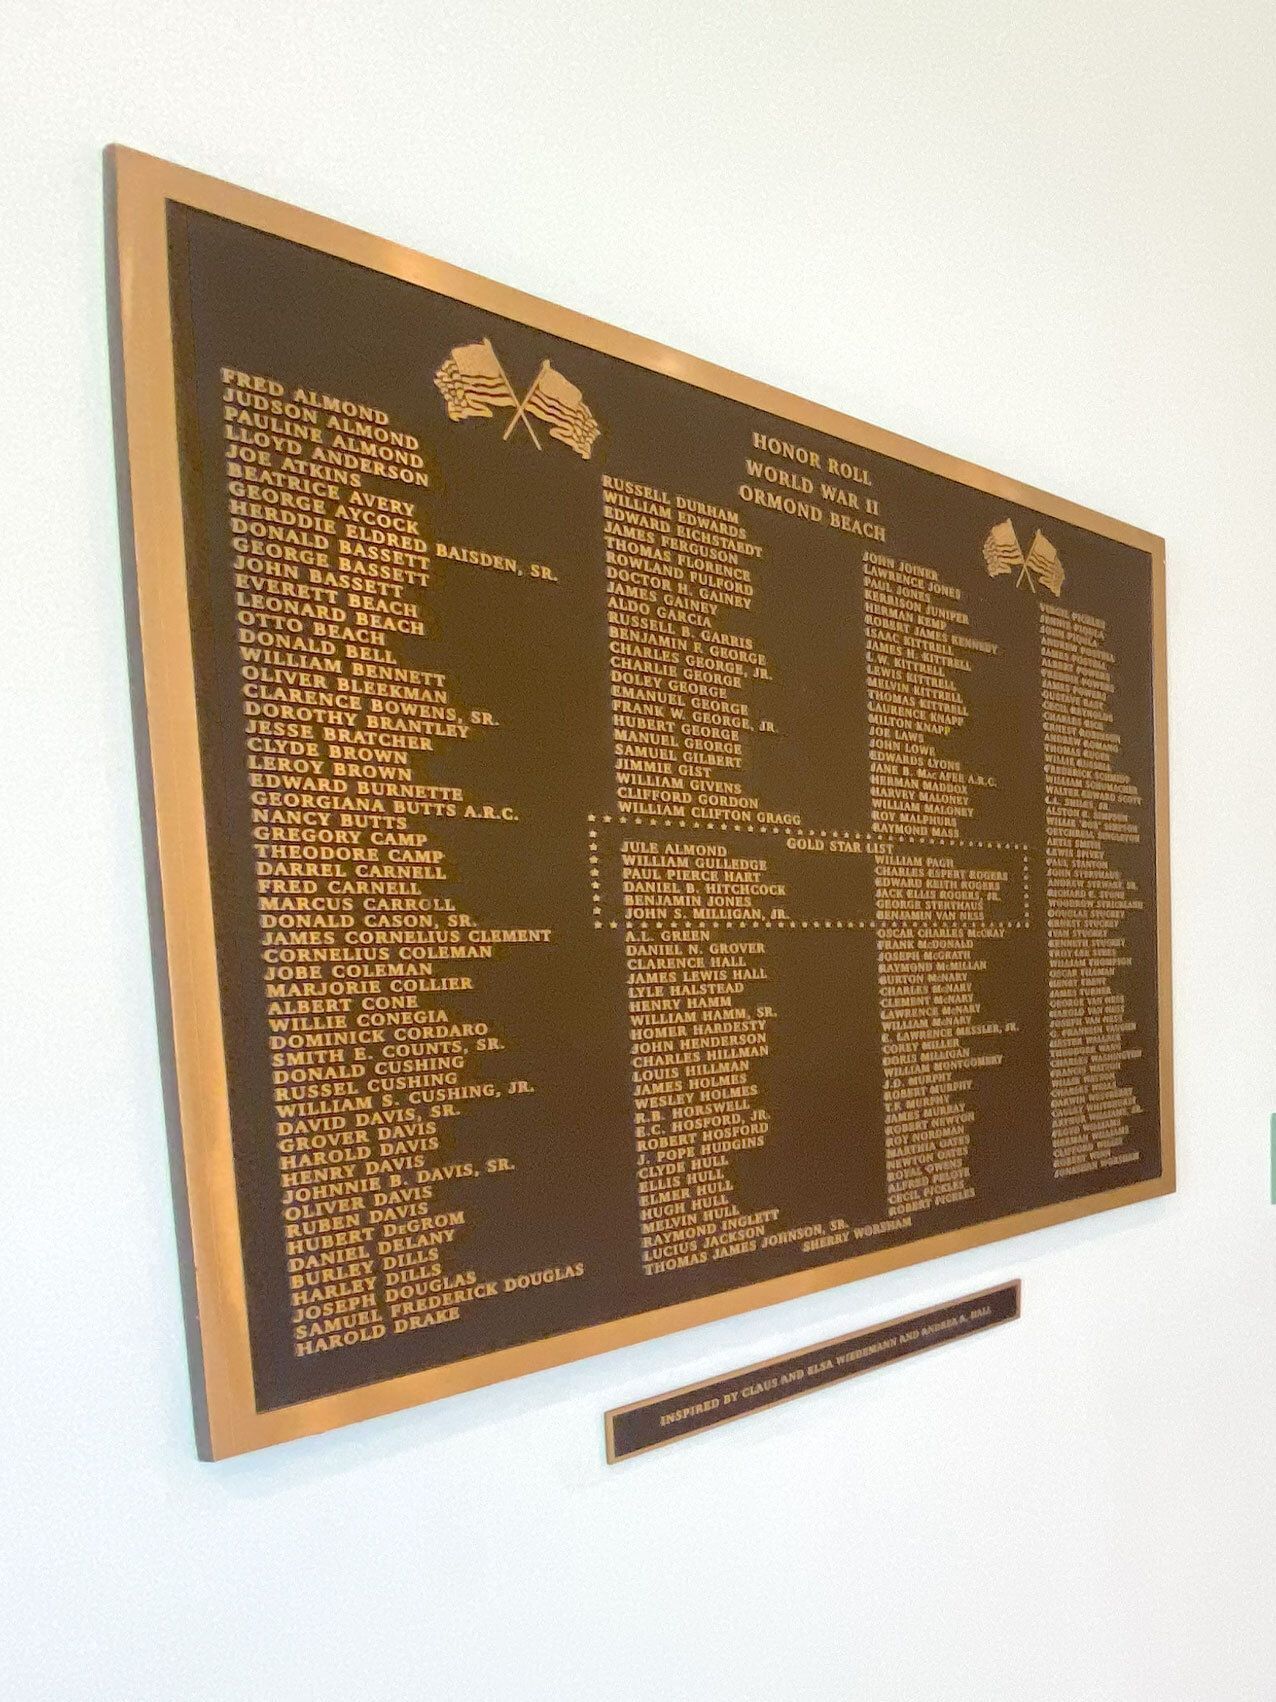 WWII Honor Roll